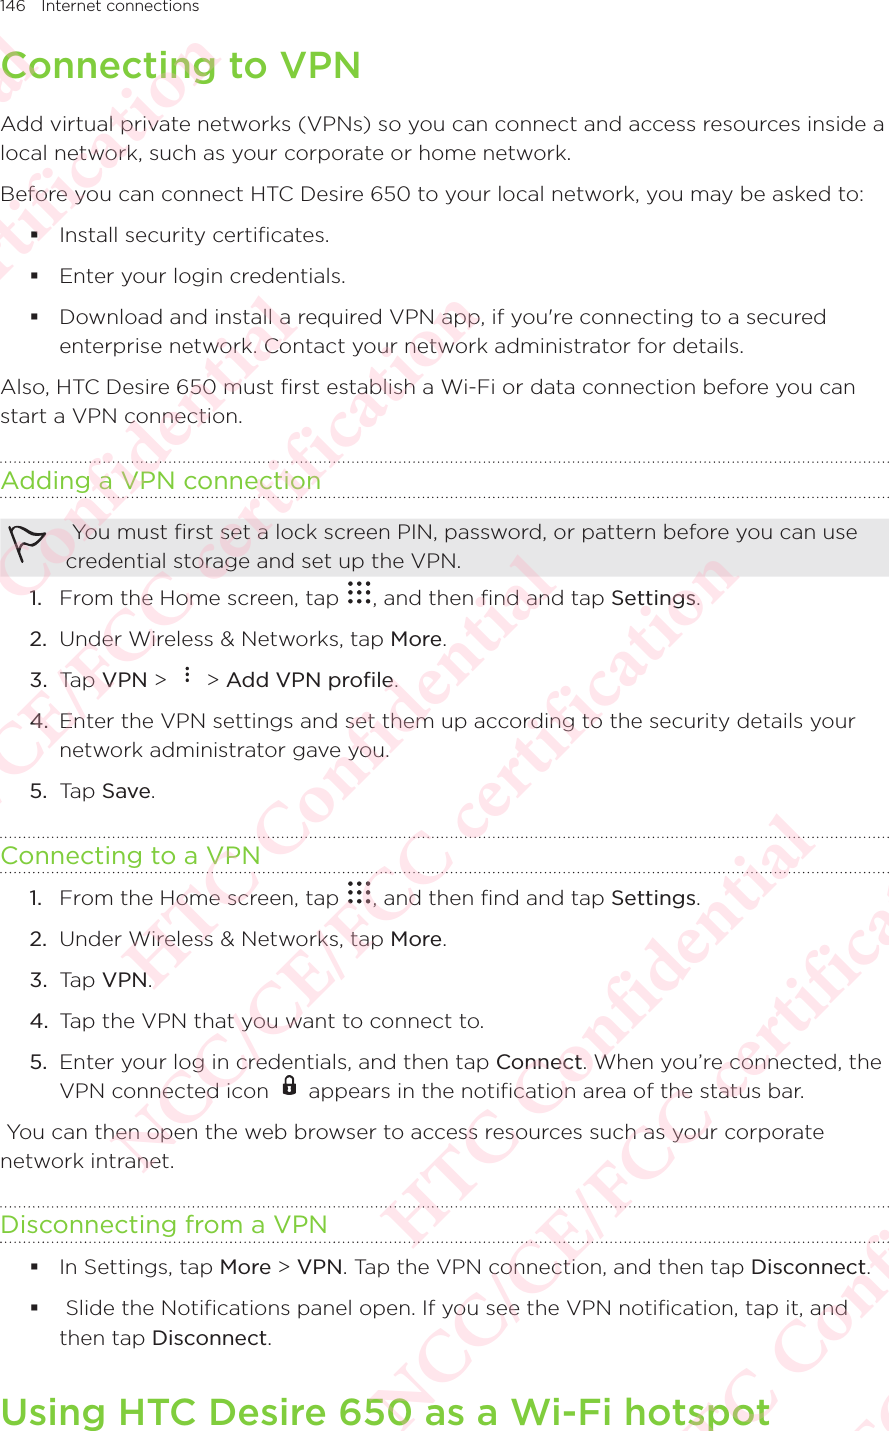 146 Internet connectionsConnecting to VPNAdd virtual private networks (VPNs) so you can connect and access resources inside a local network, such as your corporate or home network. Before you can connect HTC Desire 650 to your local network, you may be asked to:  Install security certificates.  Enter your login credentials.  Download and install a required VPN app, if you&apos;re connecting to a secured enterprise network. Contact your network administrator for details. Also, HTC Desire 650 must first establish a Wi-Fi or data connection before you can start a VPN connection. Adding a VPN connection You must first set a lock screen PIN, password, or pattern before you can use credential storage and set up the VPN. 1.  From the Home screen, tap  , and then find and tap Settings. 2.  Under Wireless &amp; Networks, tap More. 3.  Tap VPN &gt;   &gt; Add VPN profile. 4.  Enter the VPN settings and set them up according to the security details your network administrator gave you. 5.  Tap Save. Connecting to a VPN1.  From the Home screen, tap  , and then find and tap Settings. 2.  Under Wireless &amp; Networks, tap More. 3.  Tap VPN. 4.  Tap the VPN that you want to connect to. 5.  Enter your log in credentials, and then tap Connect. When you’re connected, the VPN connected icon   appears in the notification area of the status bar.  You can then open the web browser to access resources such as your corporate network intranet. Disconnecting from a VPN In Settings, tap More &gt; VPN. Tap the VPN connection, and then tap Disconnect.   Slide the Notifications panel open. If you see the VPN notification, tap it, and then tap Disconnect. Using HTC Desire 650 as a Wi-Fi hotspotHTC Confidential NCC/CE/FCC certification  HTC Confidential NCC/CE/FCC certification  HTC Confidential NCC/CE/FCC certification  HTC Confidential NCC/CE/FCC certification  HTC Confidential NCC/CE/FCC certification